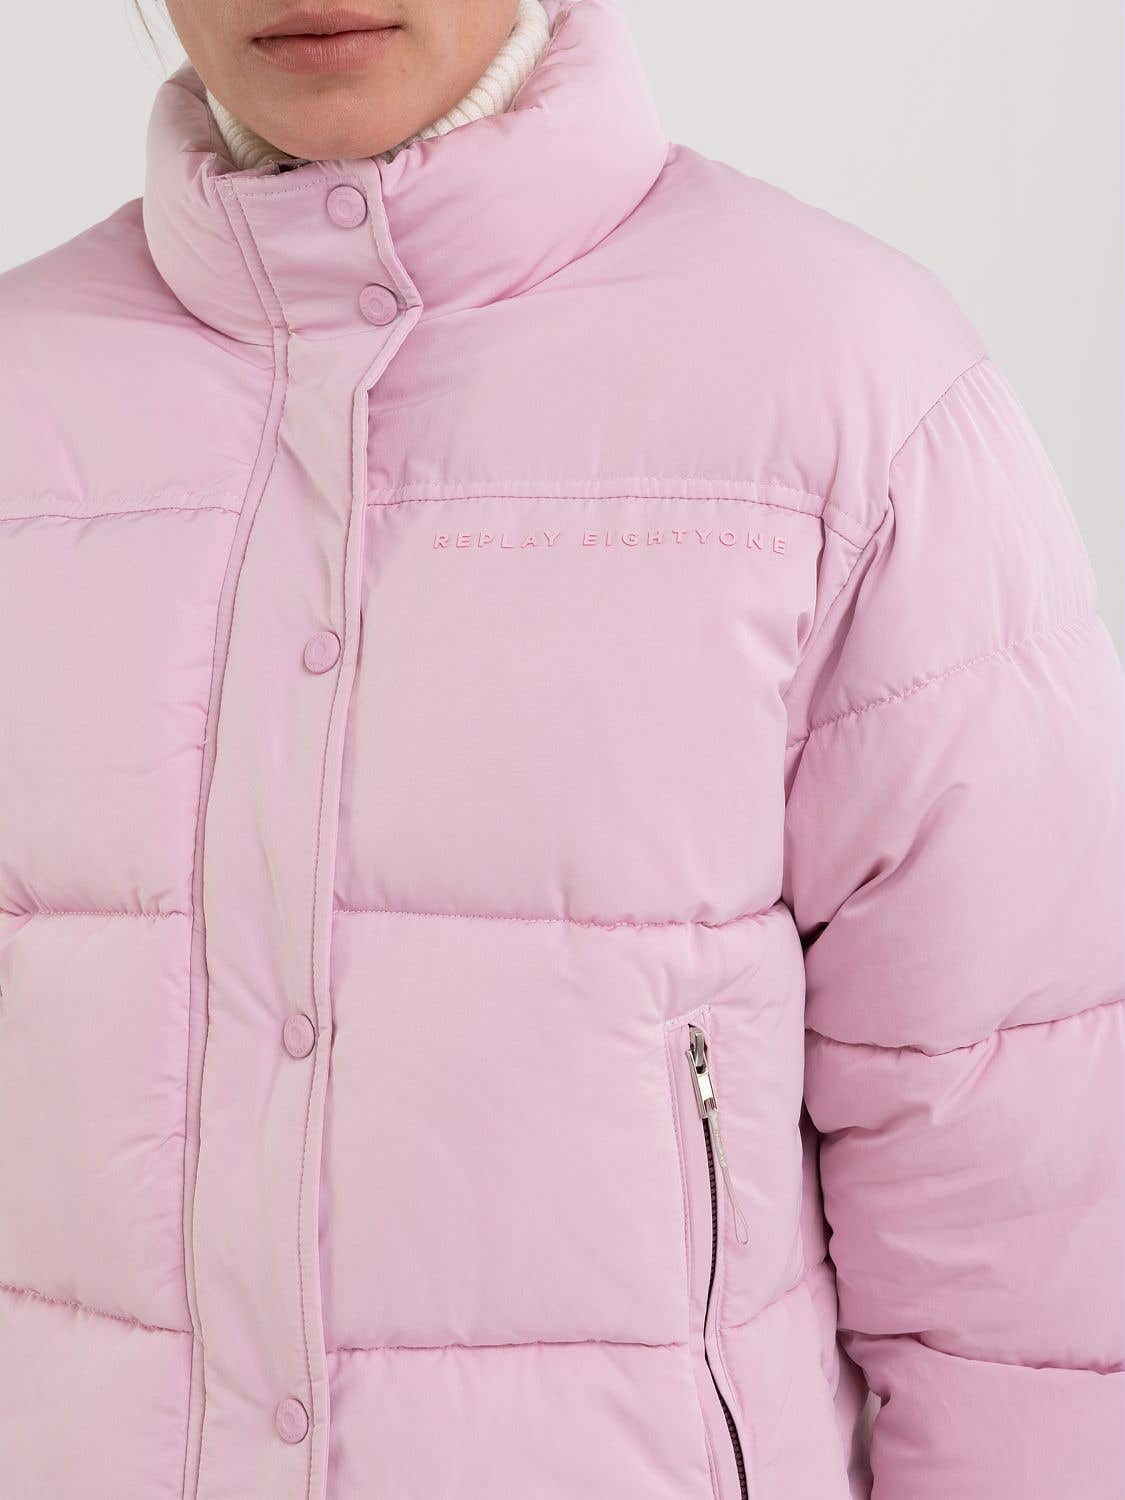 Replay W7808 84466 Jacket 666 Pink